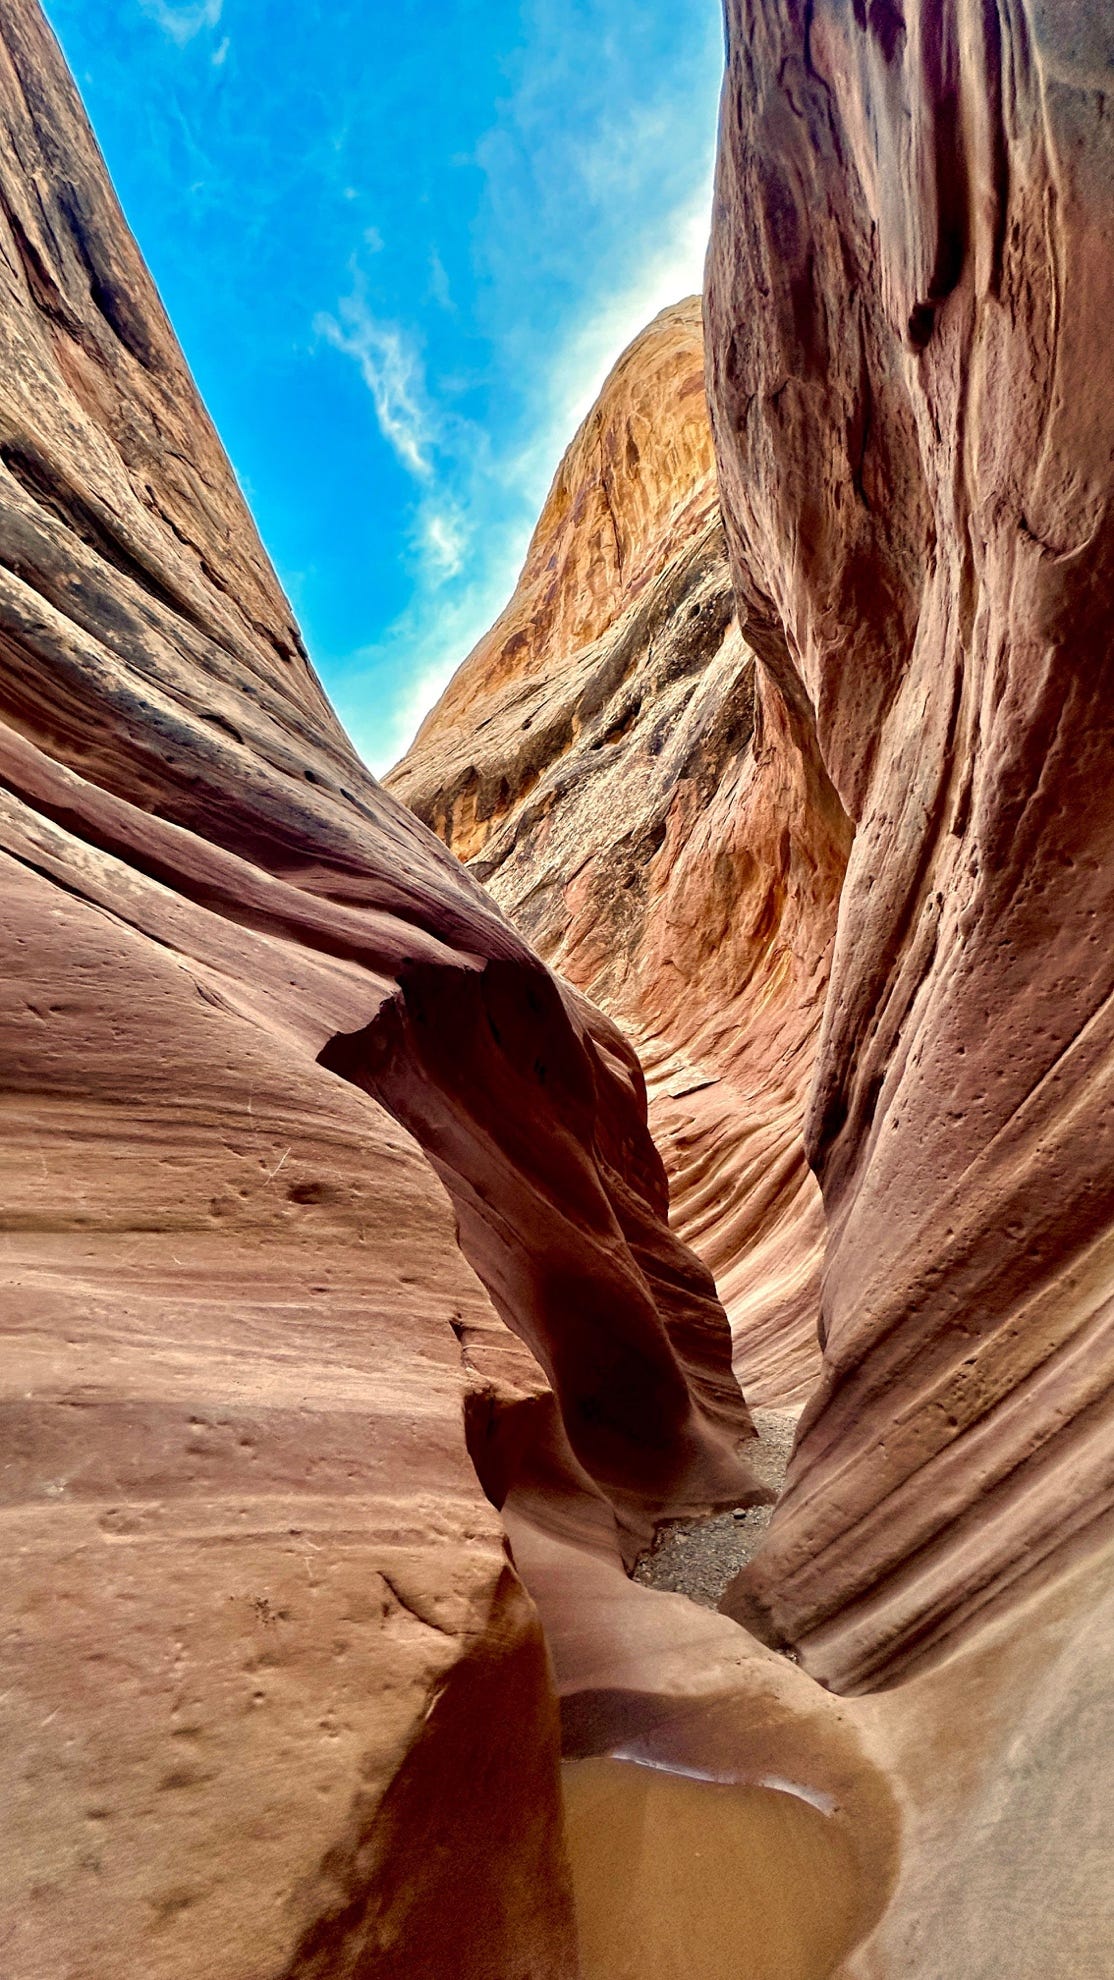 A close-up of a canyon

Description automatically generated